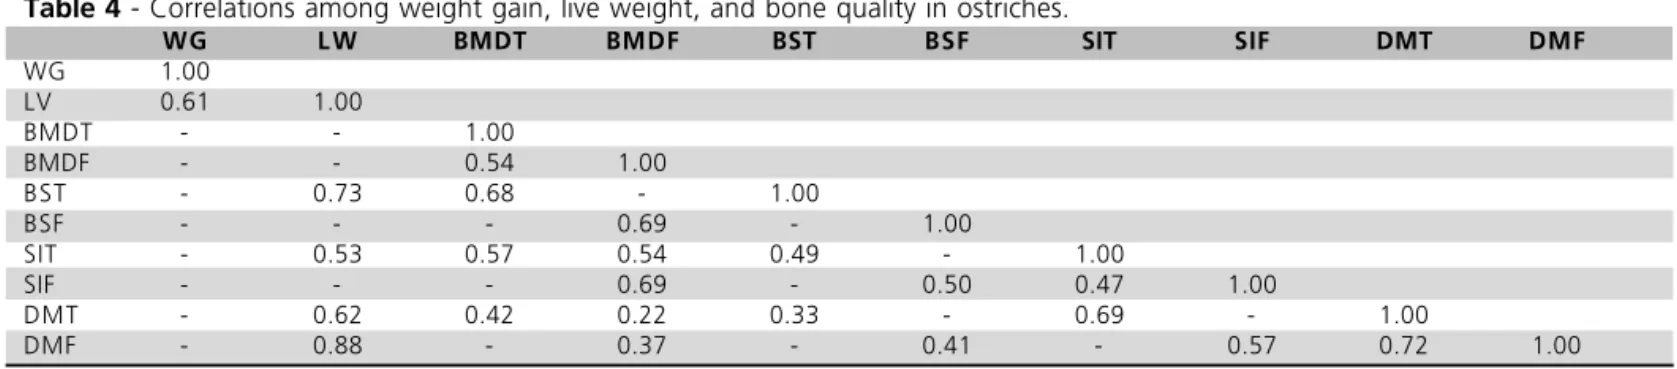 Table 4 - Correlations among weight gain, live weight, and bone quality in ostriches.